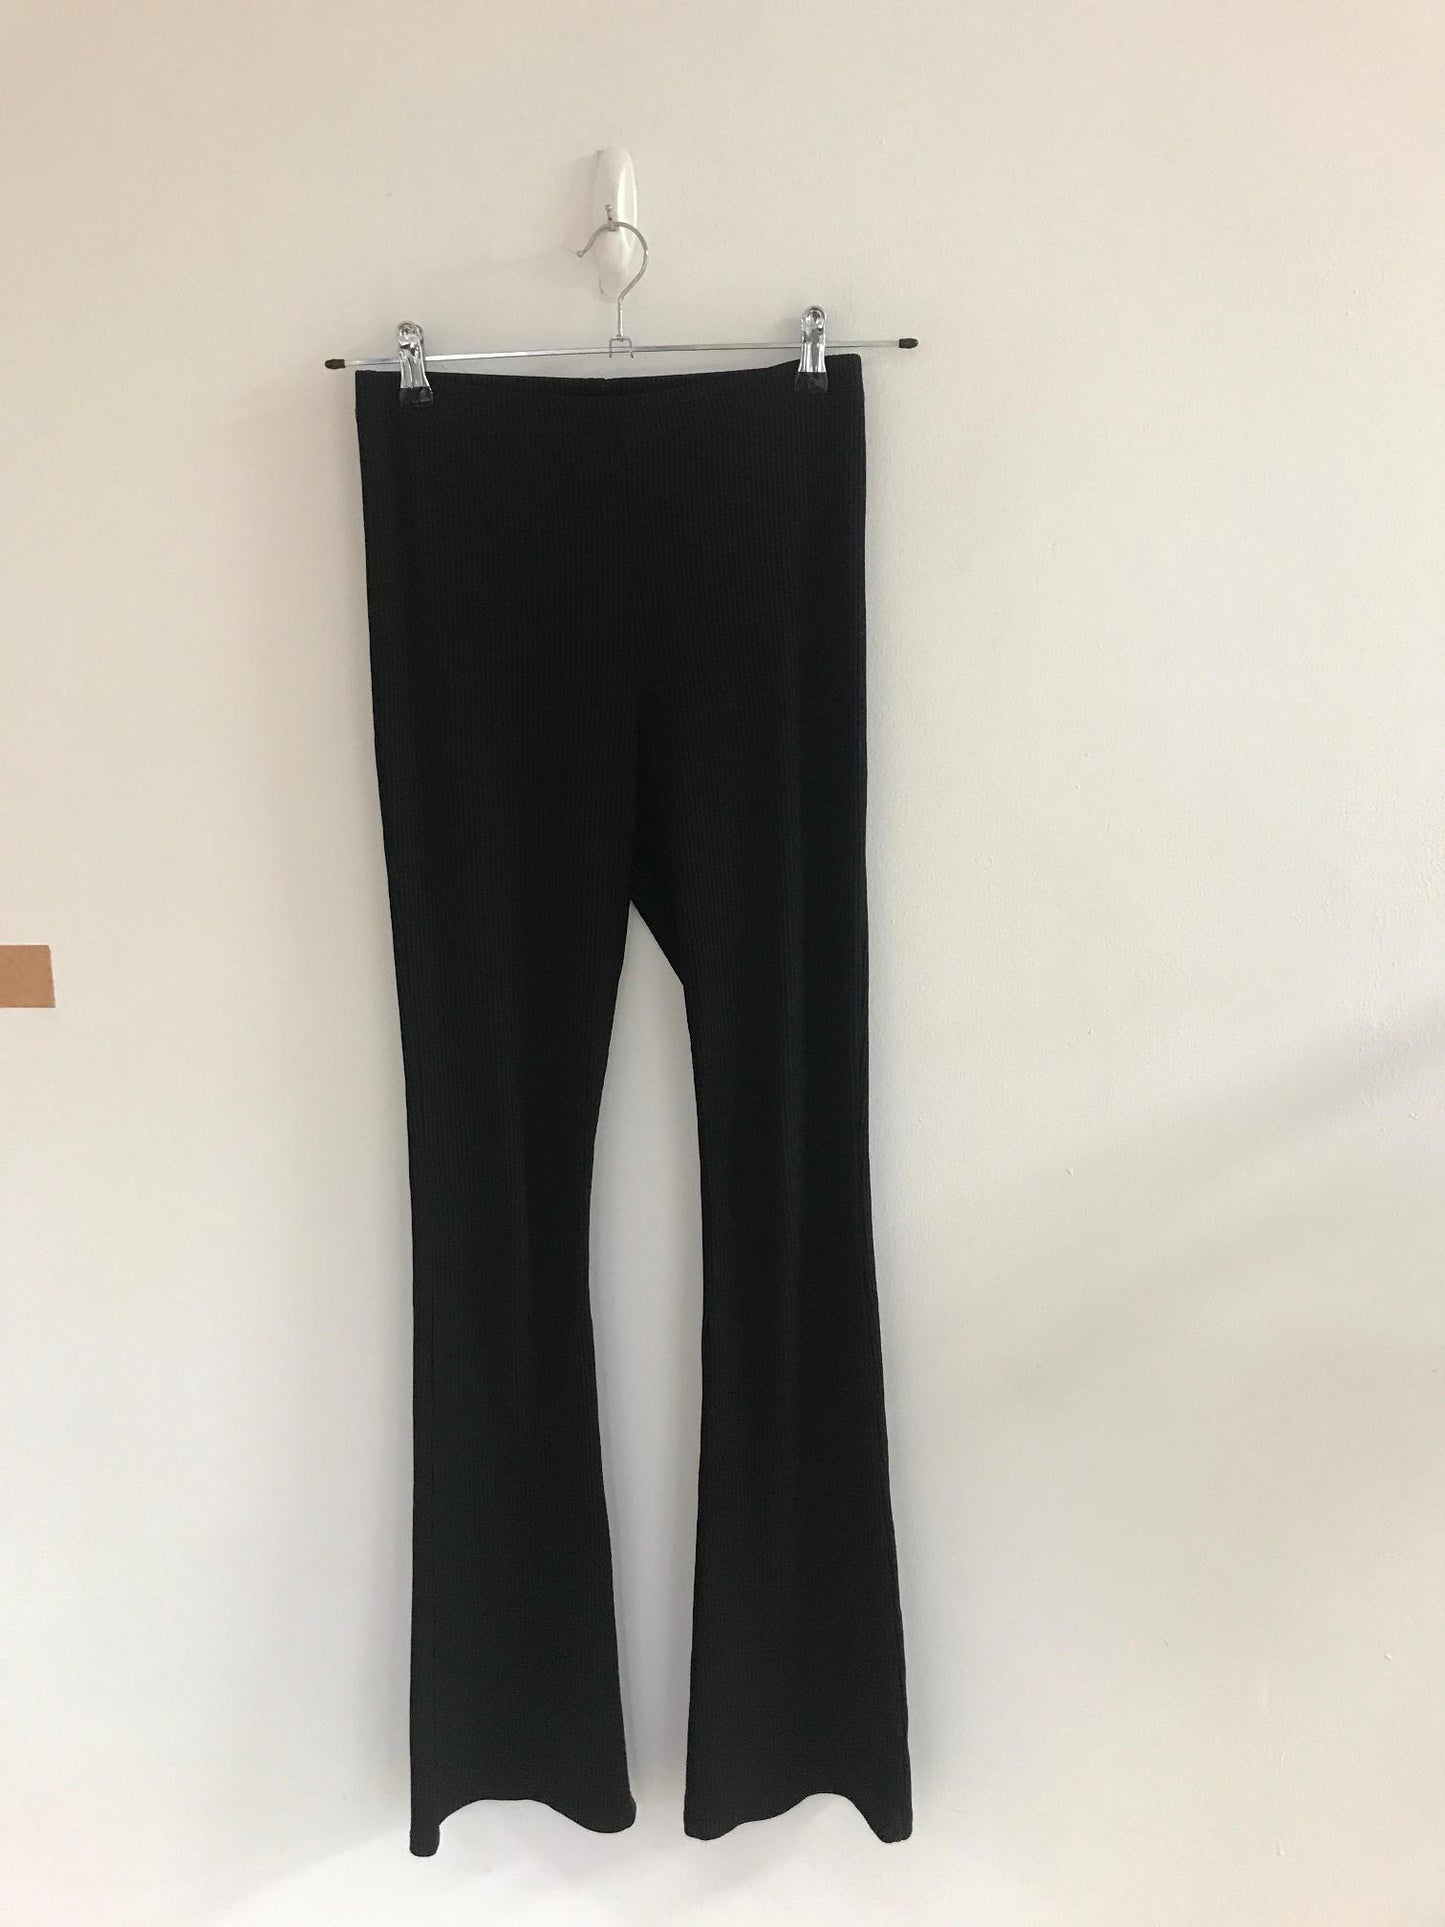 Black Ribbed Flare Trousers- Tall- High Rise, Topshop, Size 10 (Elastane, Polyester)